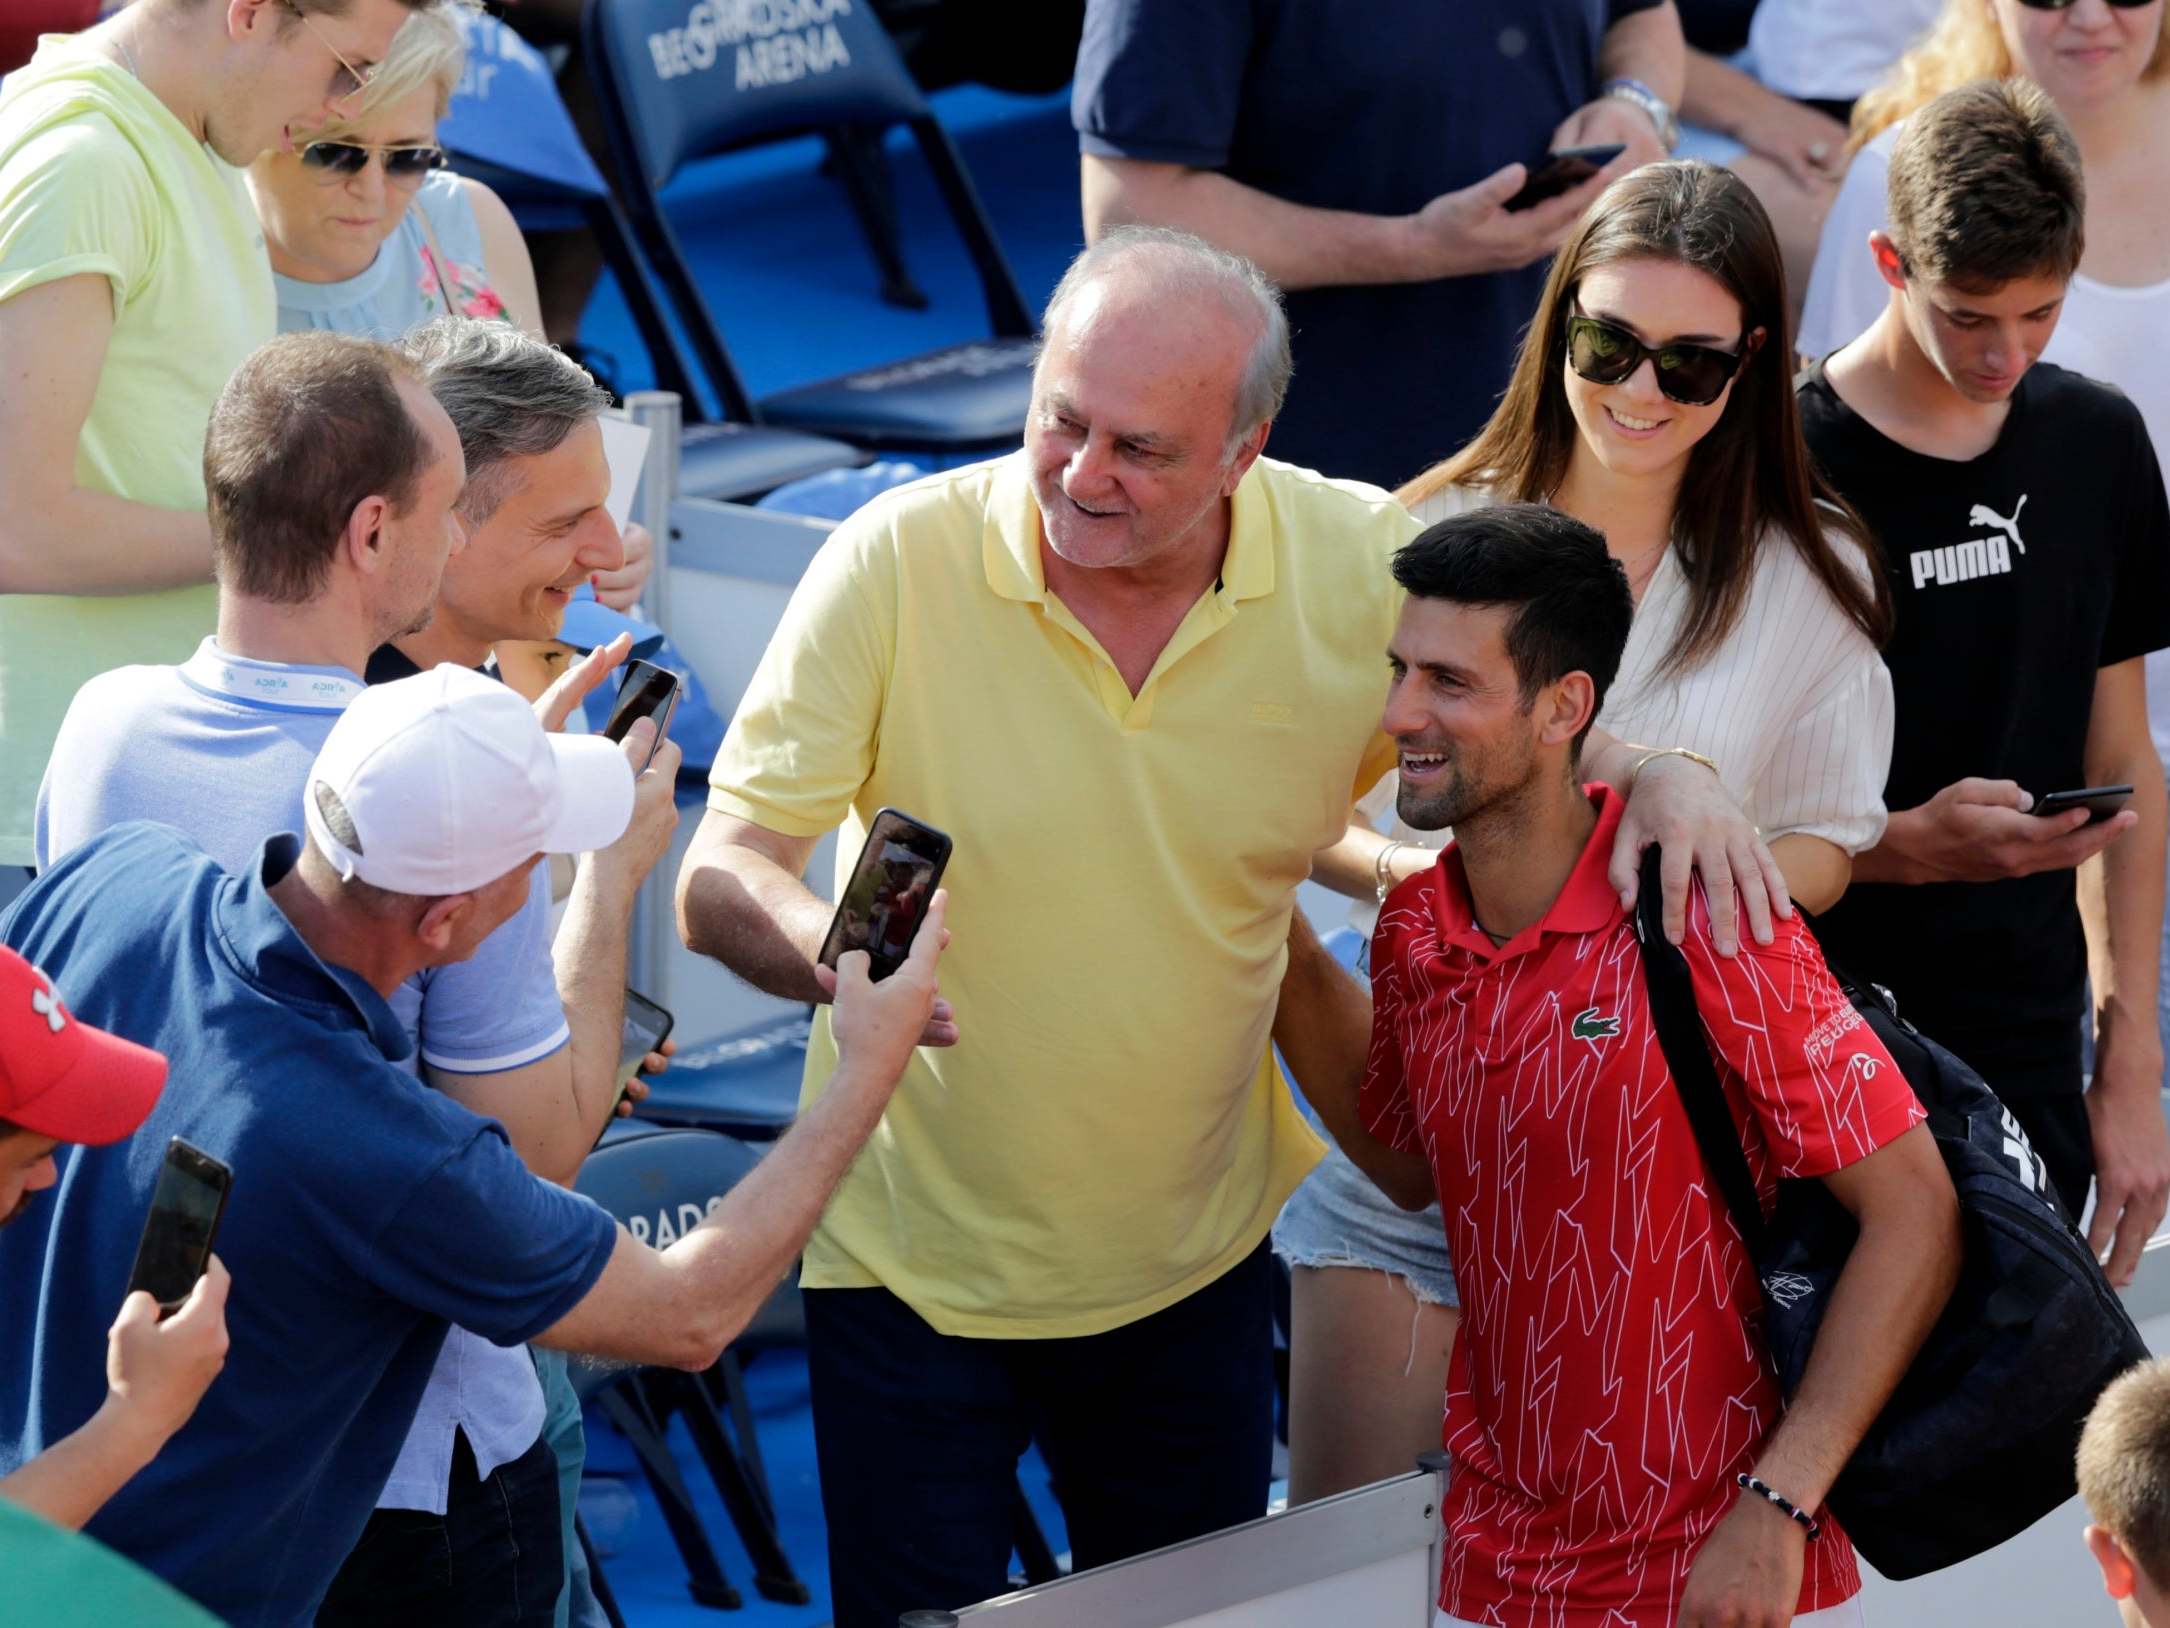 Djokovic posed for photographs with fans at events in Belgrade and Zadar